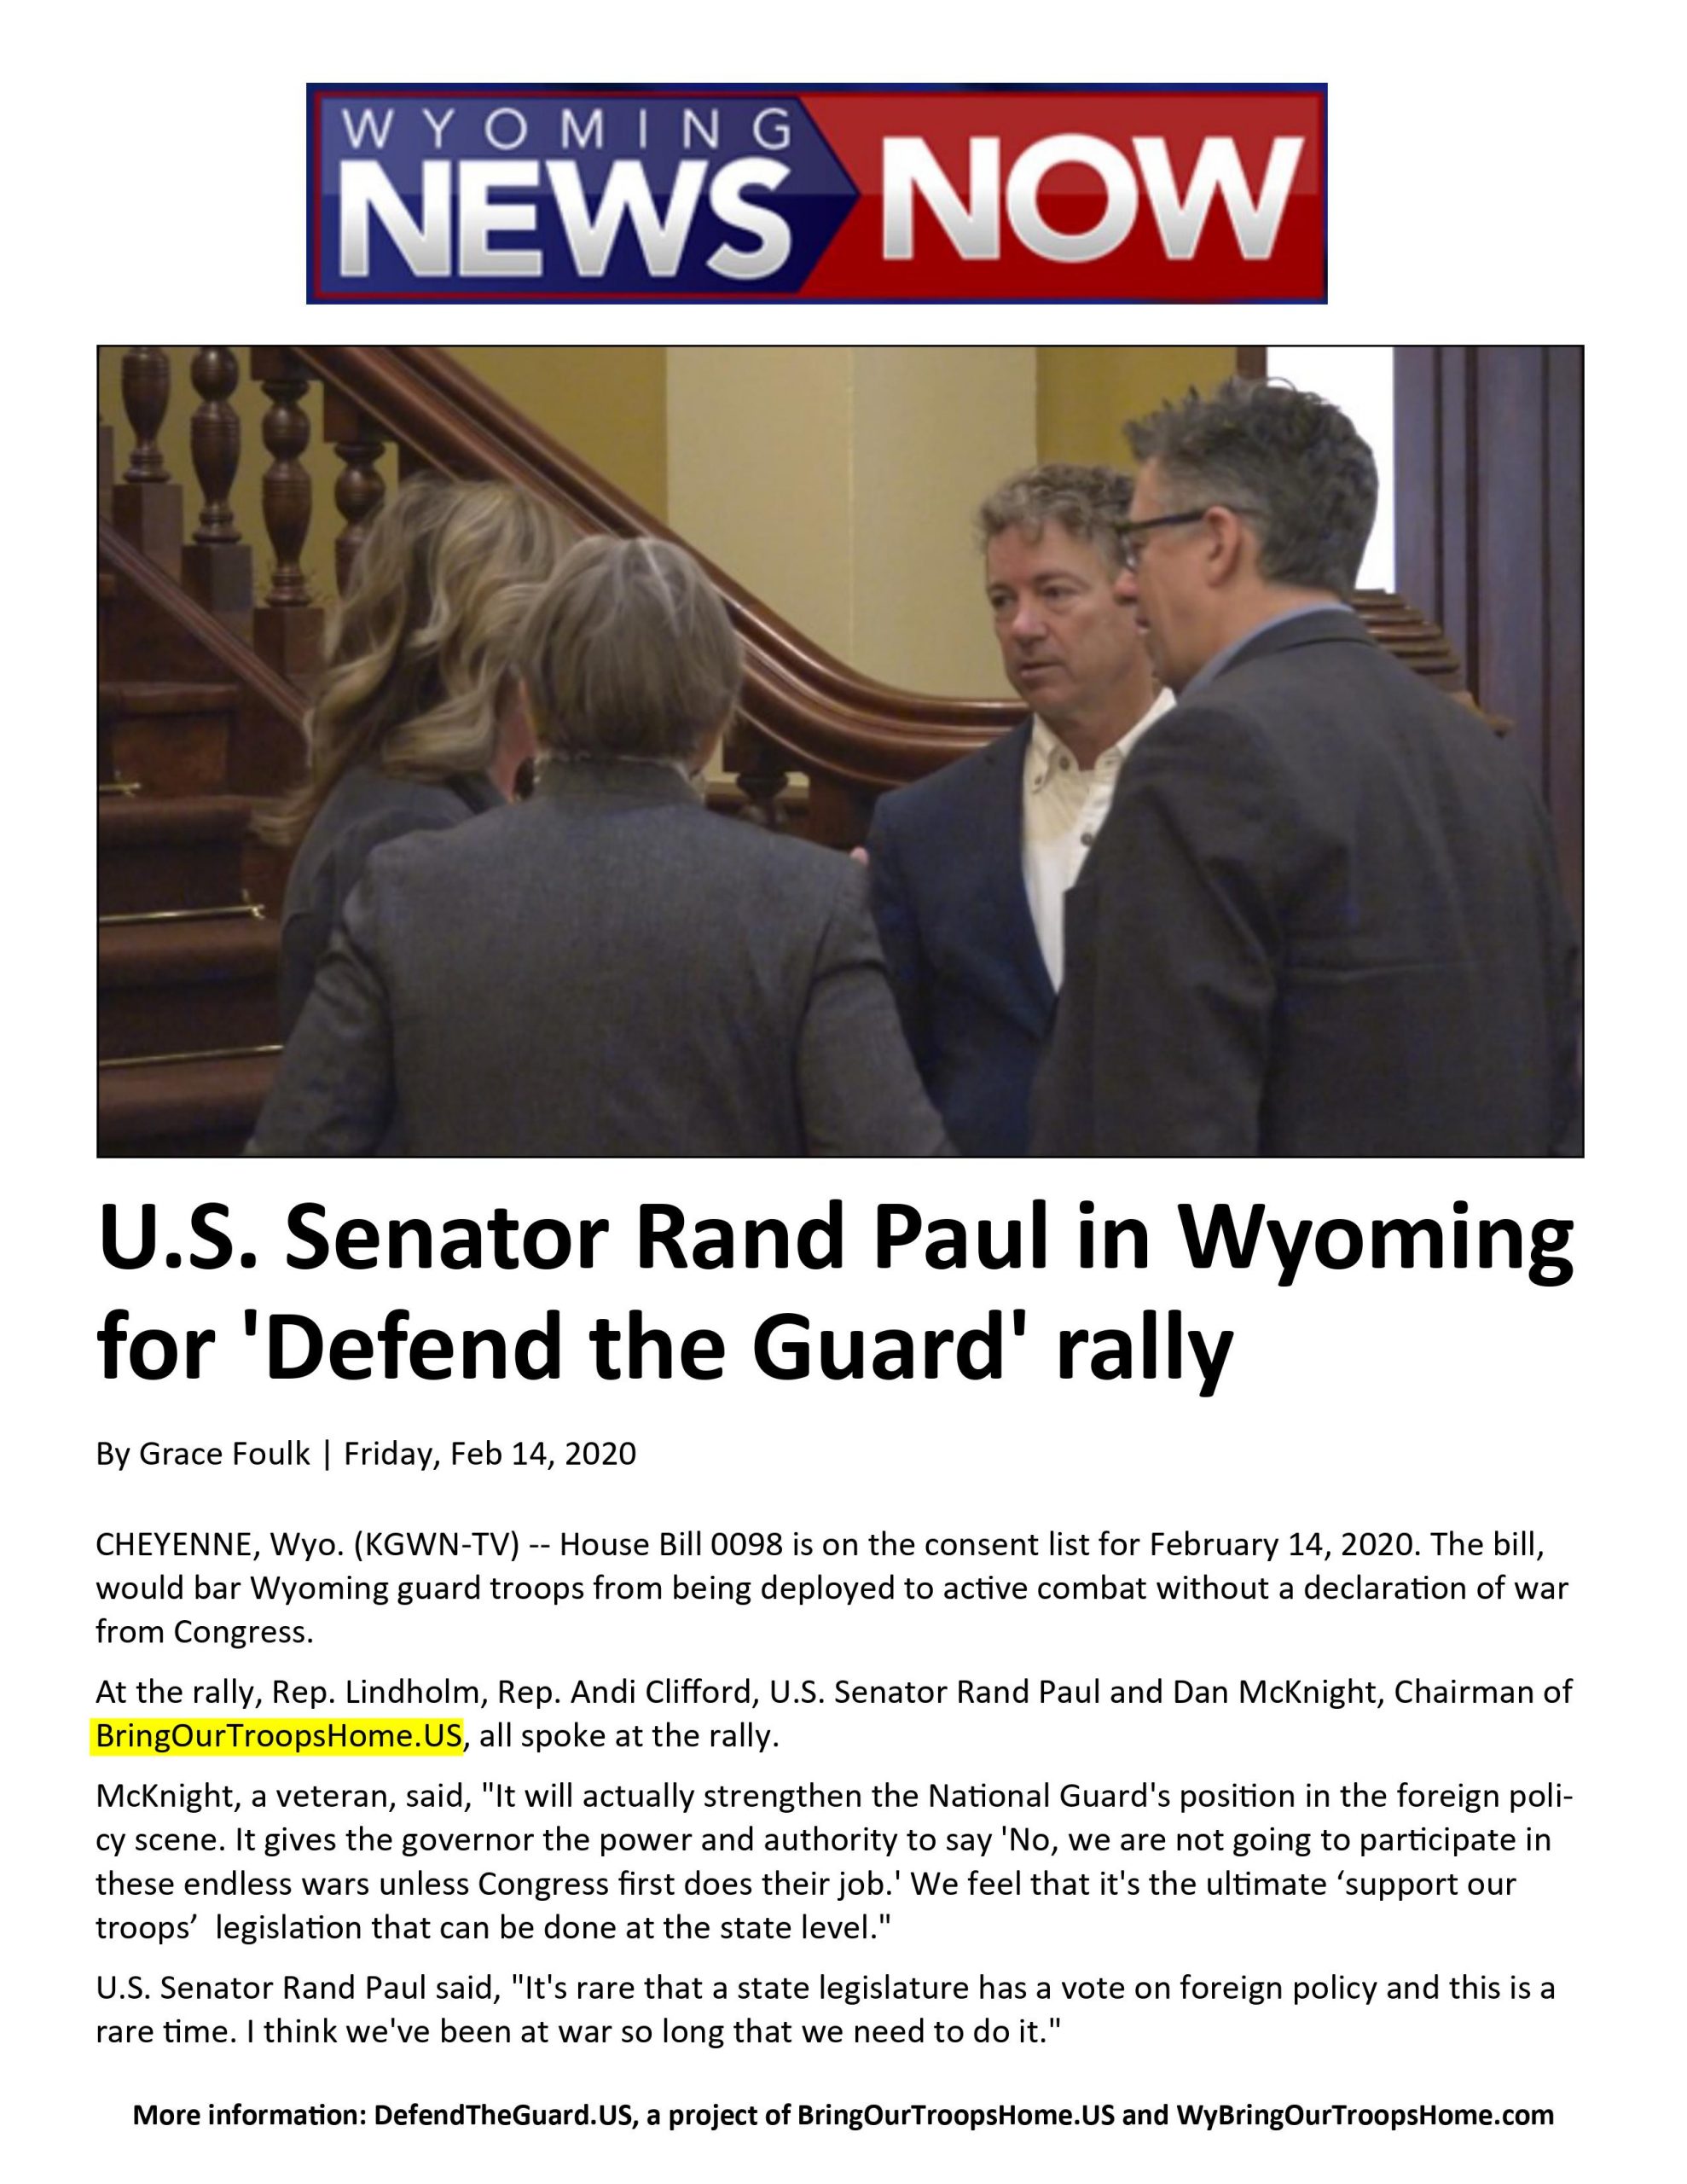 U.S. Senator Rand Paul in Wyoming for ‘Defend the Guard’ Rally